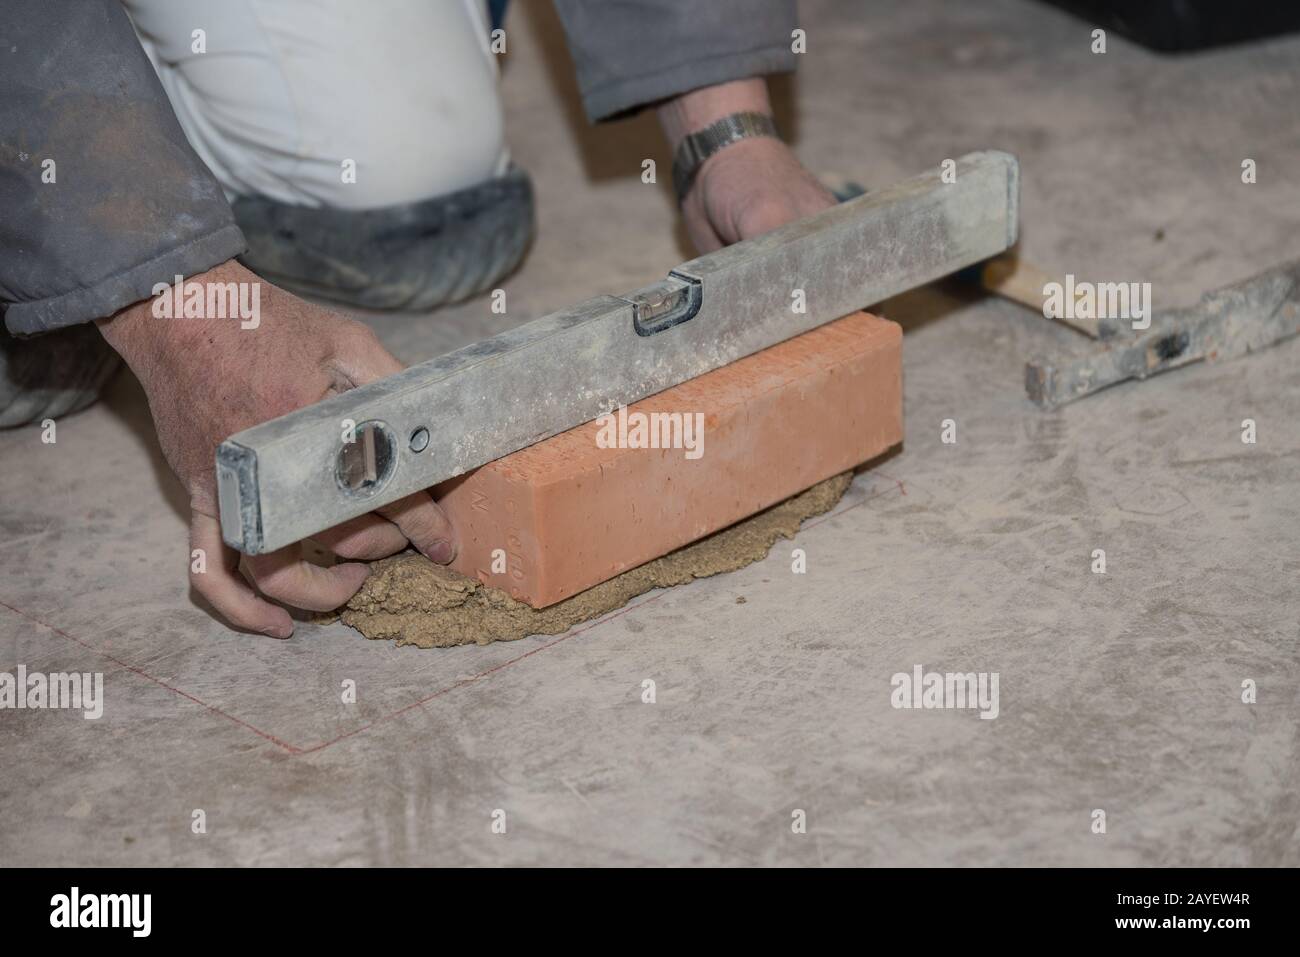 Bricklayer works with brick and mortar with the help of a spirit level - close-up Stock Photo